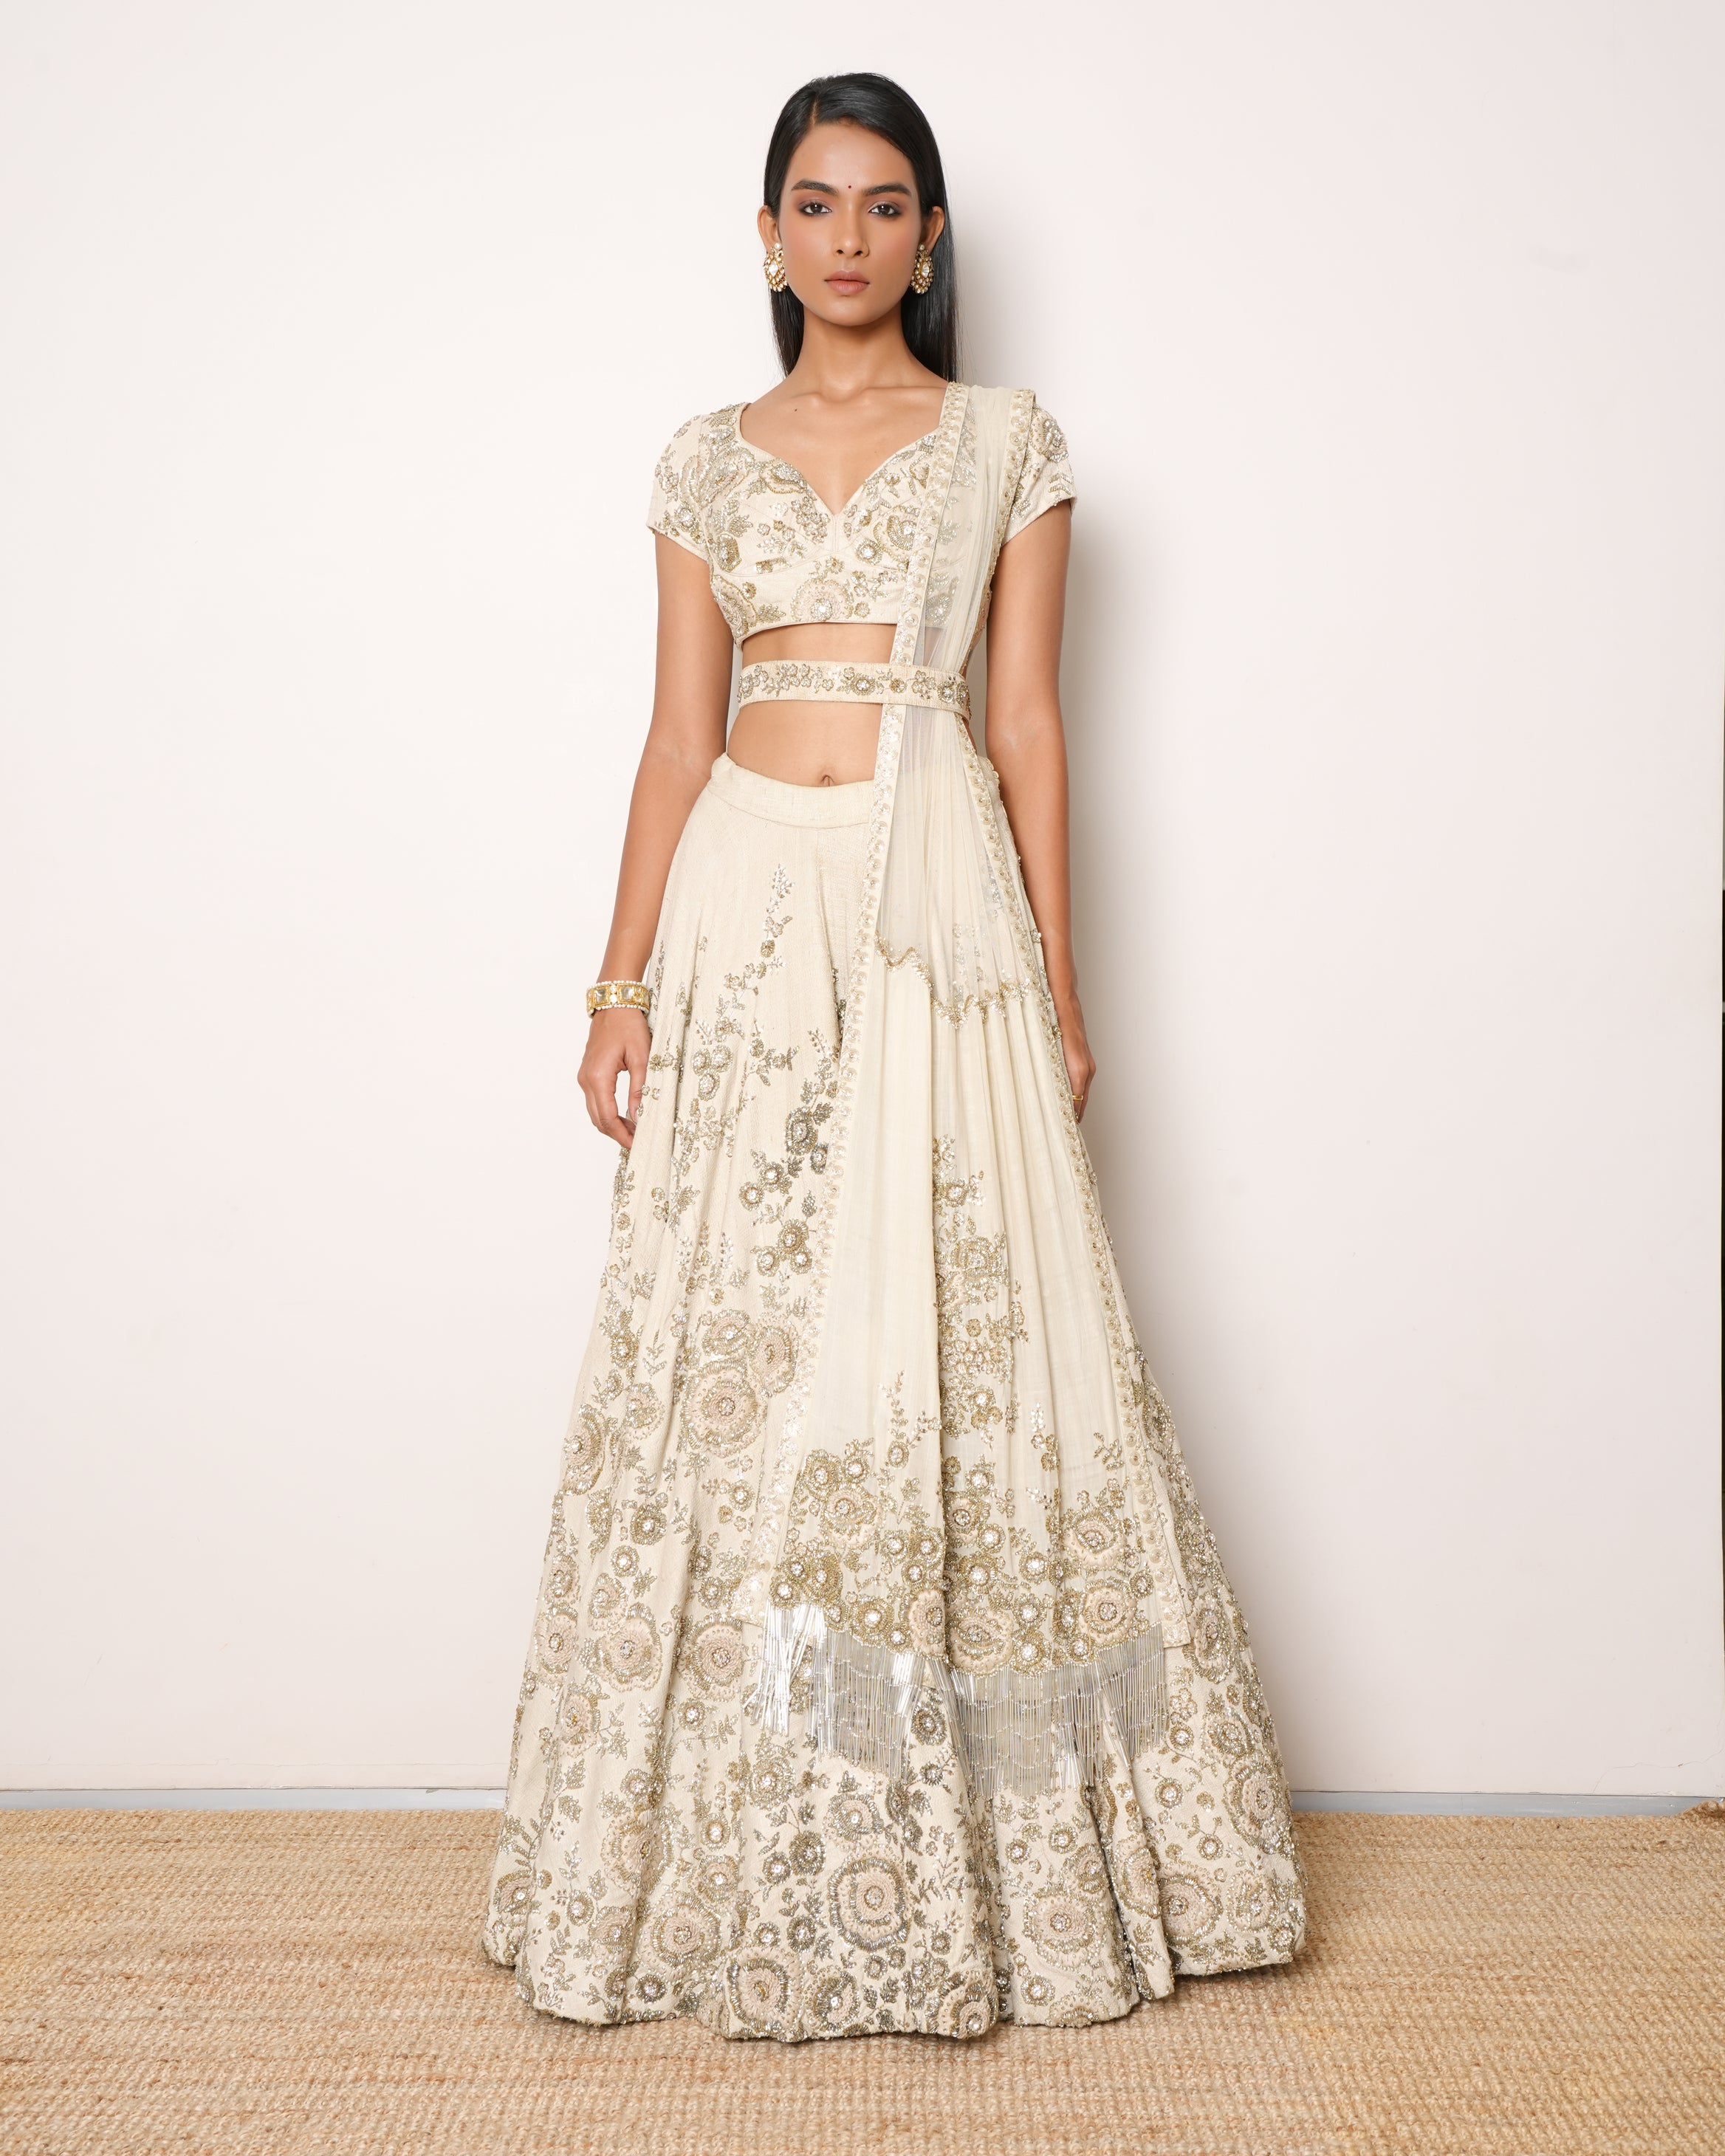 Best bridal lehengas for girls who love red | Times of India